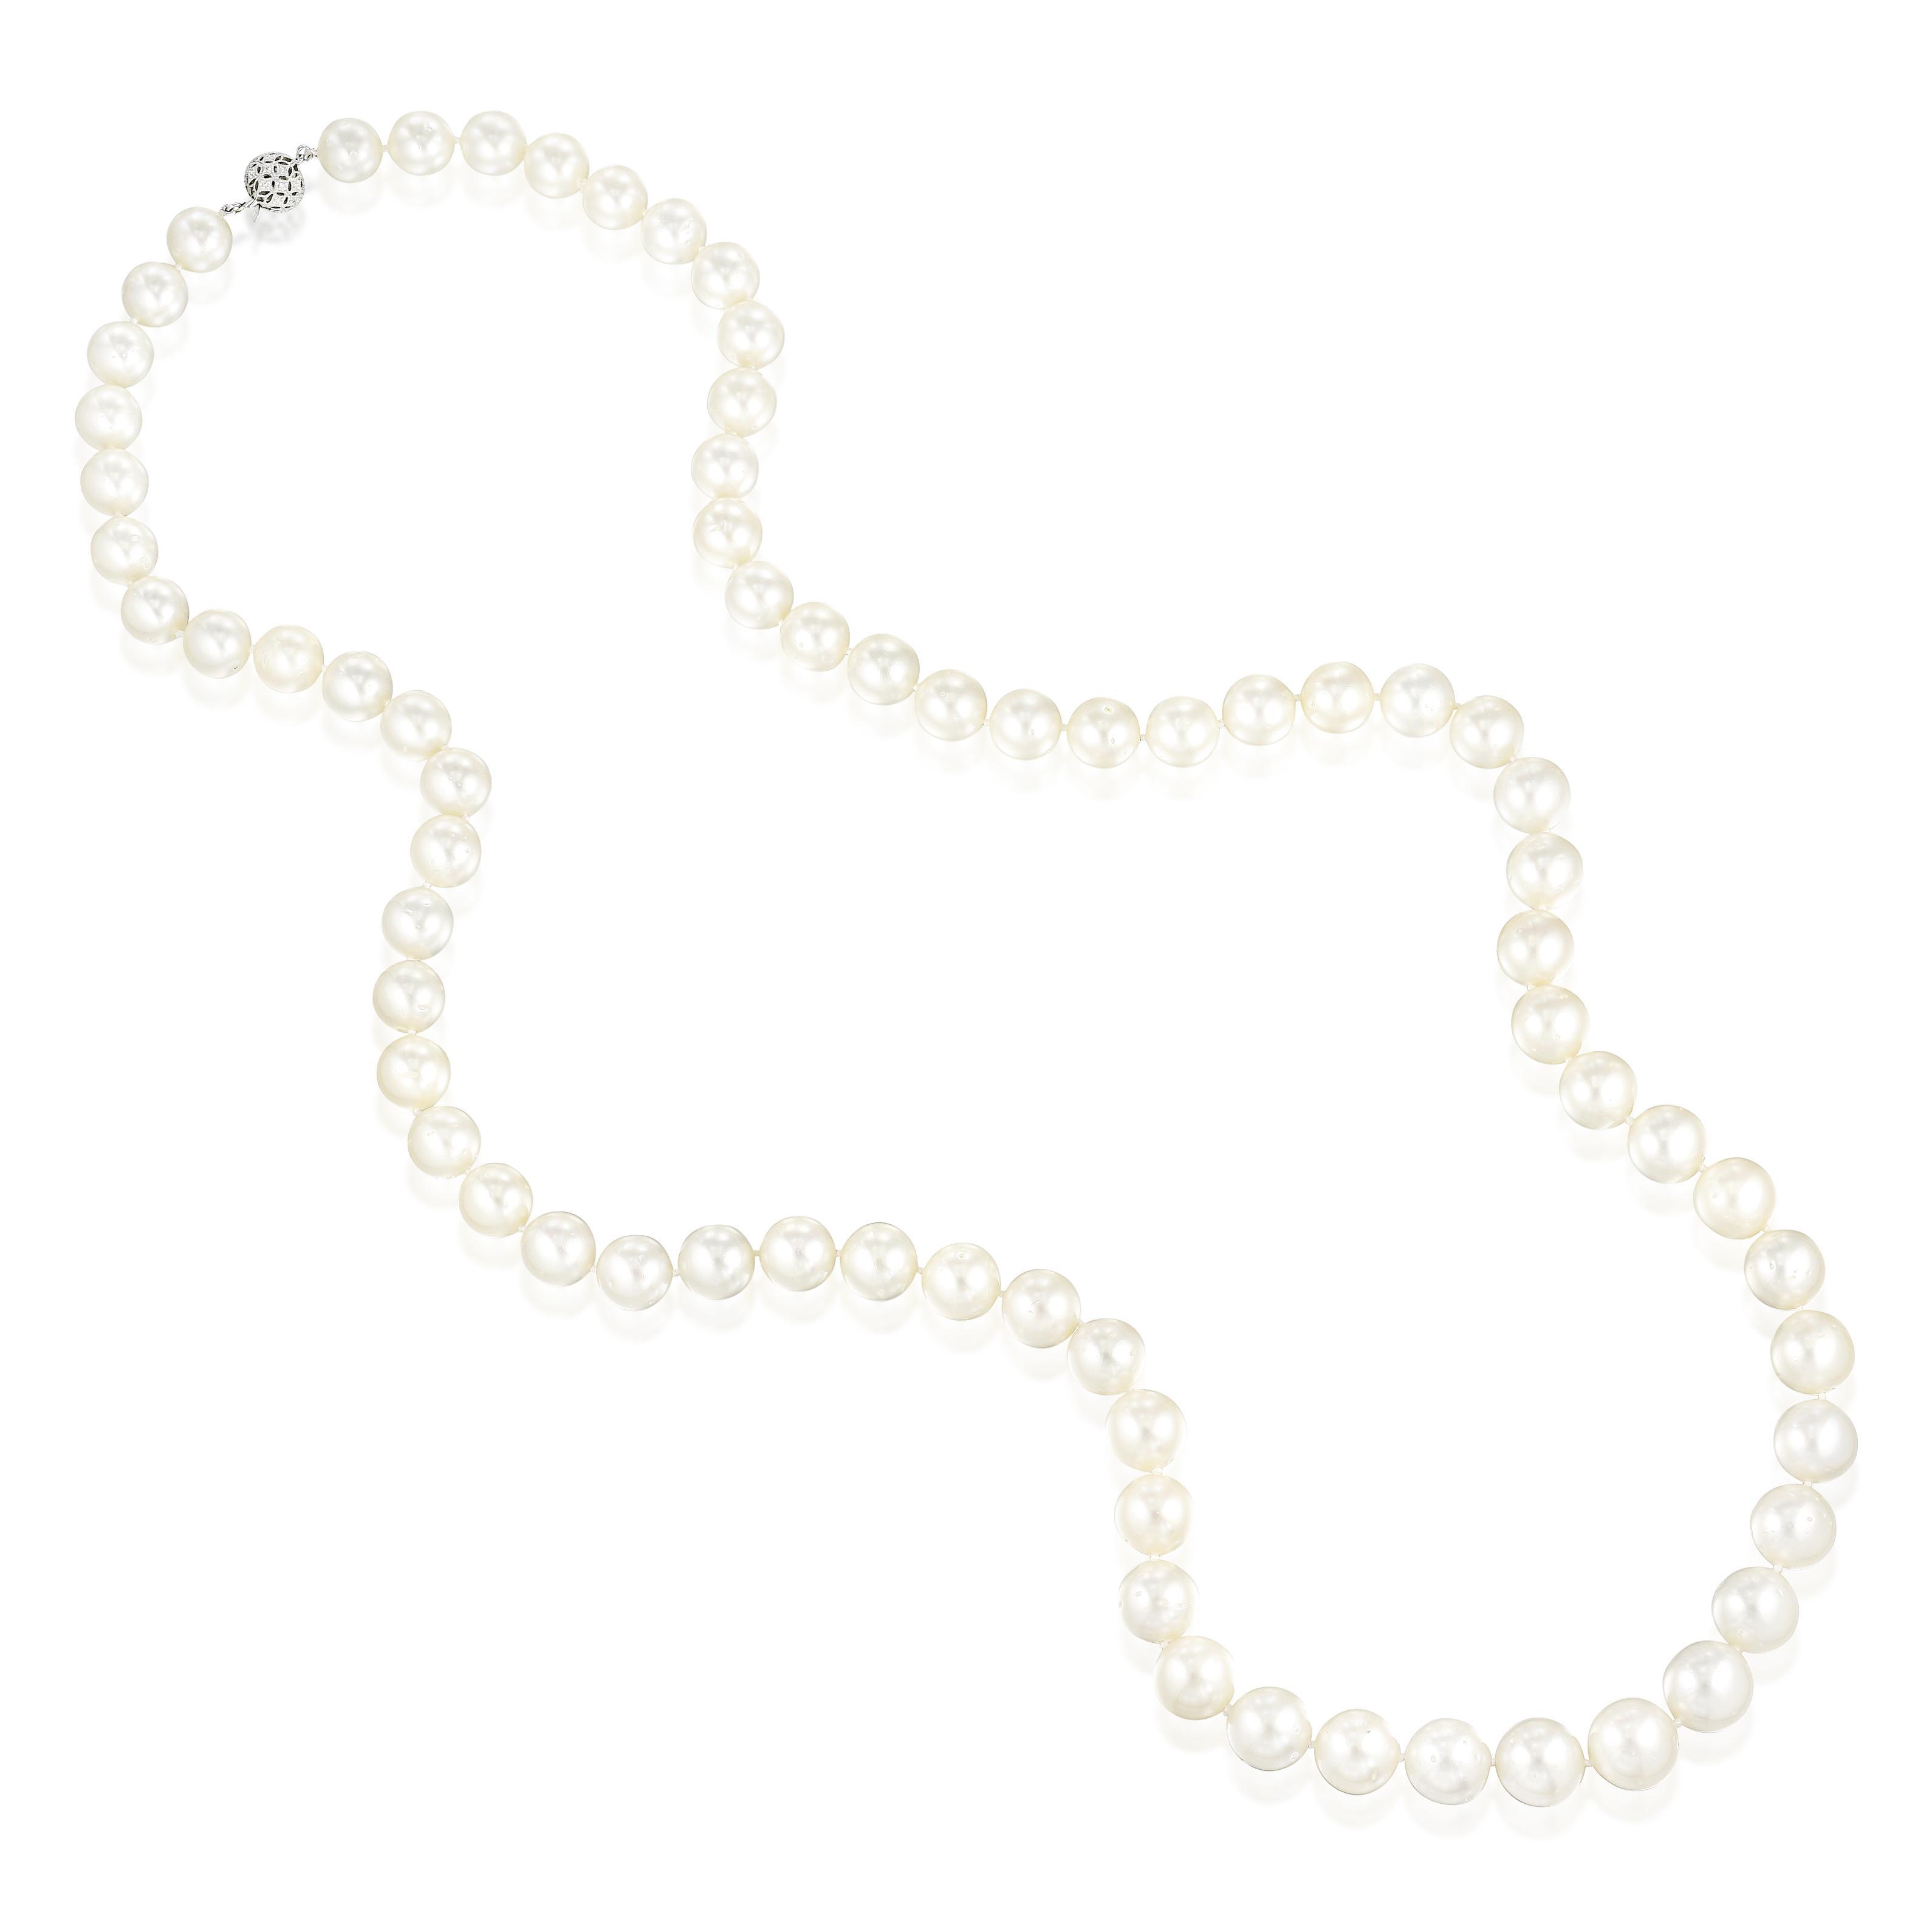 LONG PEARL NECKLACE Summary of 30bd42